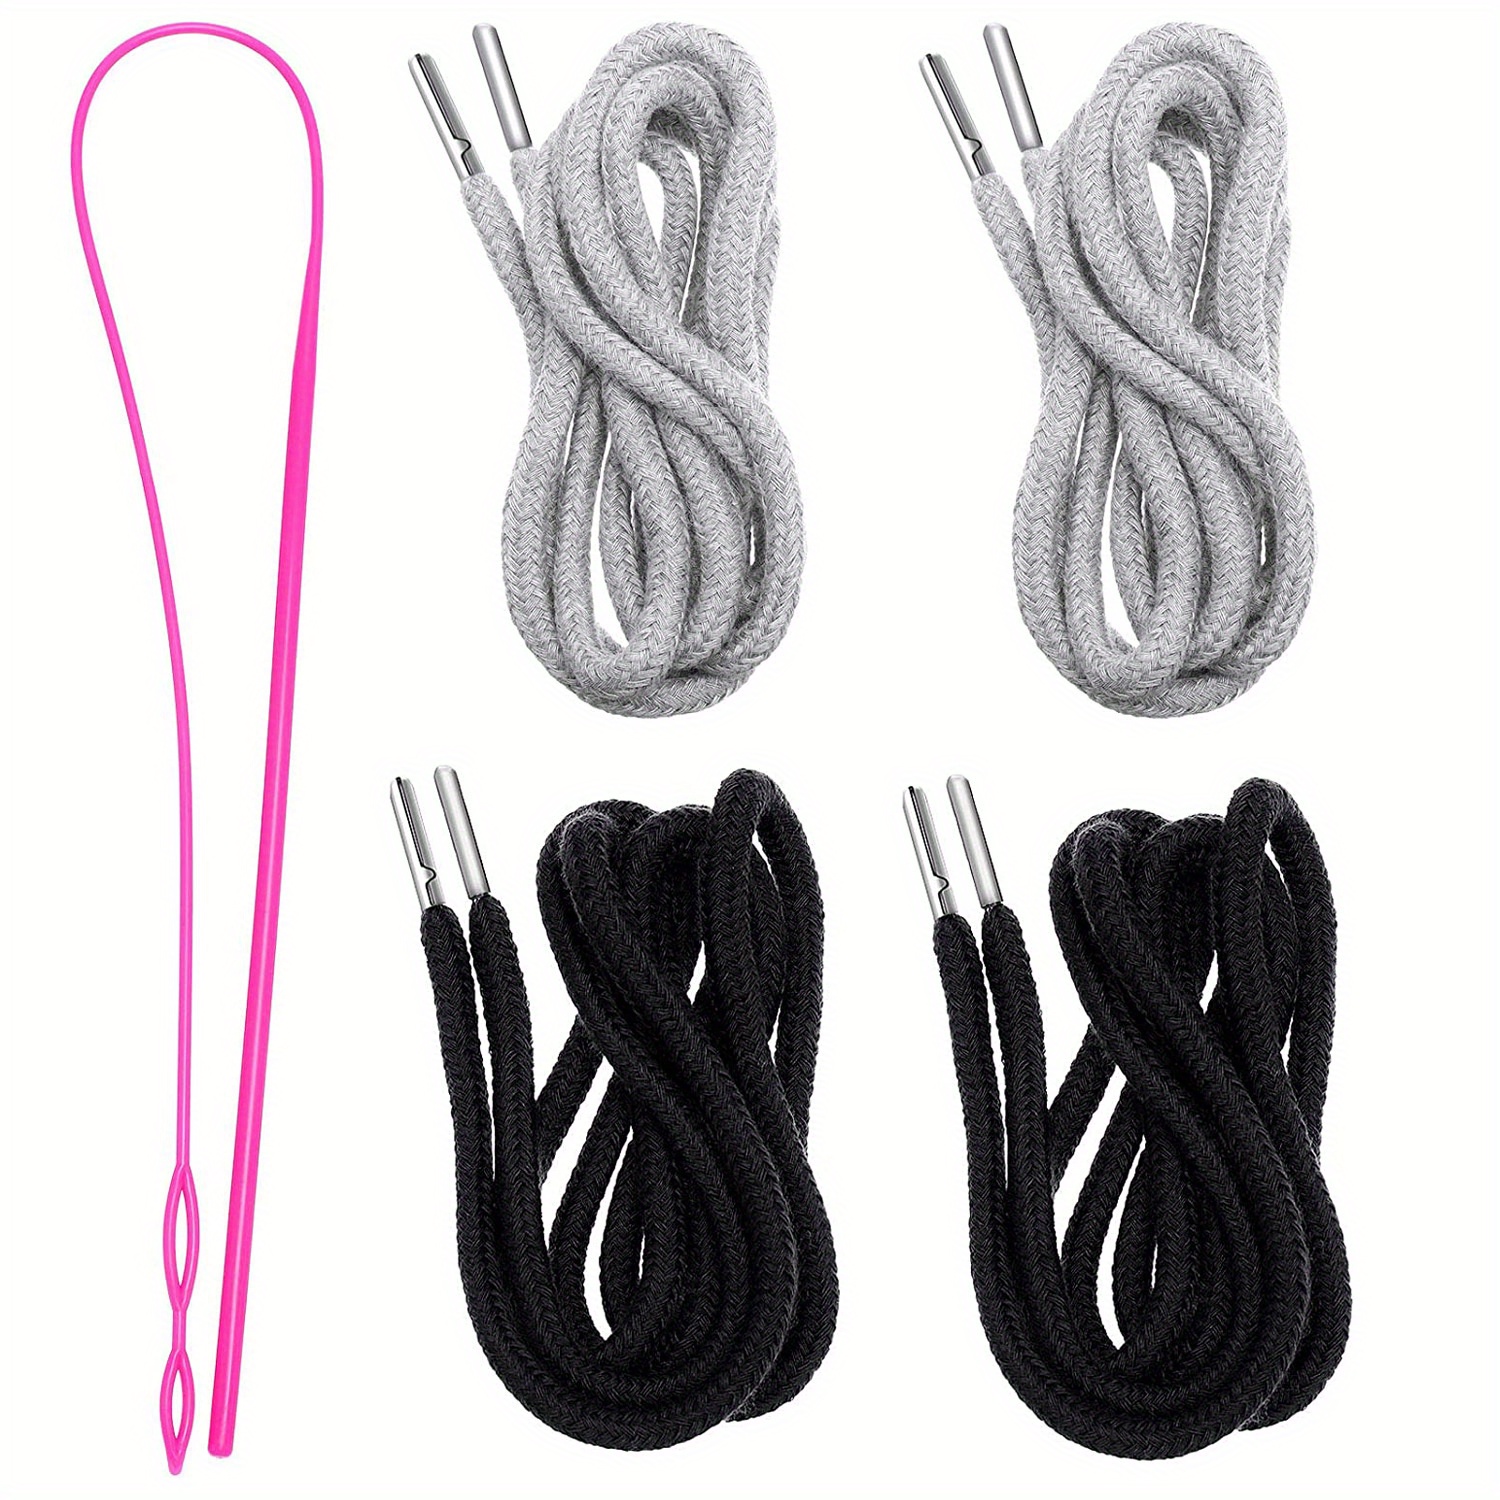 30 Pcs 66 Inches XL Lengthened Drawstring Replacement Drawstring Cords Hoodie  String Replacement Clothing Drawstring with 3 Pcs Flexible Easy Threaders  for Sweatpants Hoodies Pants Jackets Coats